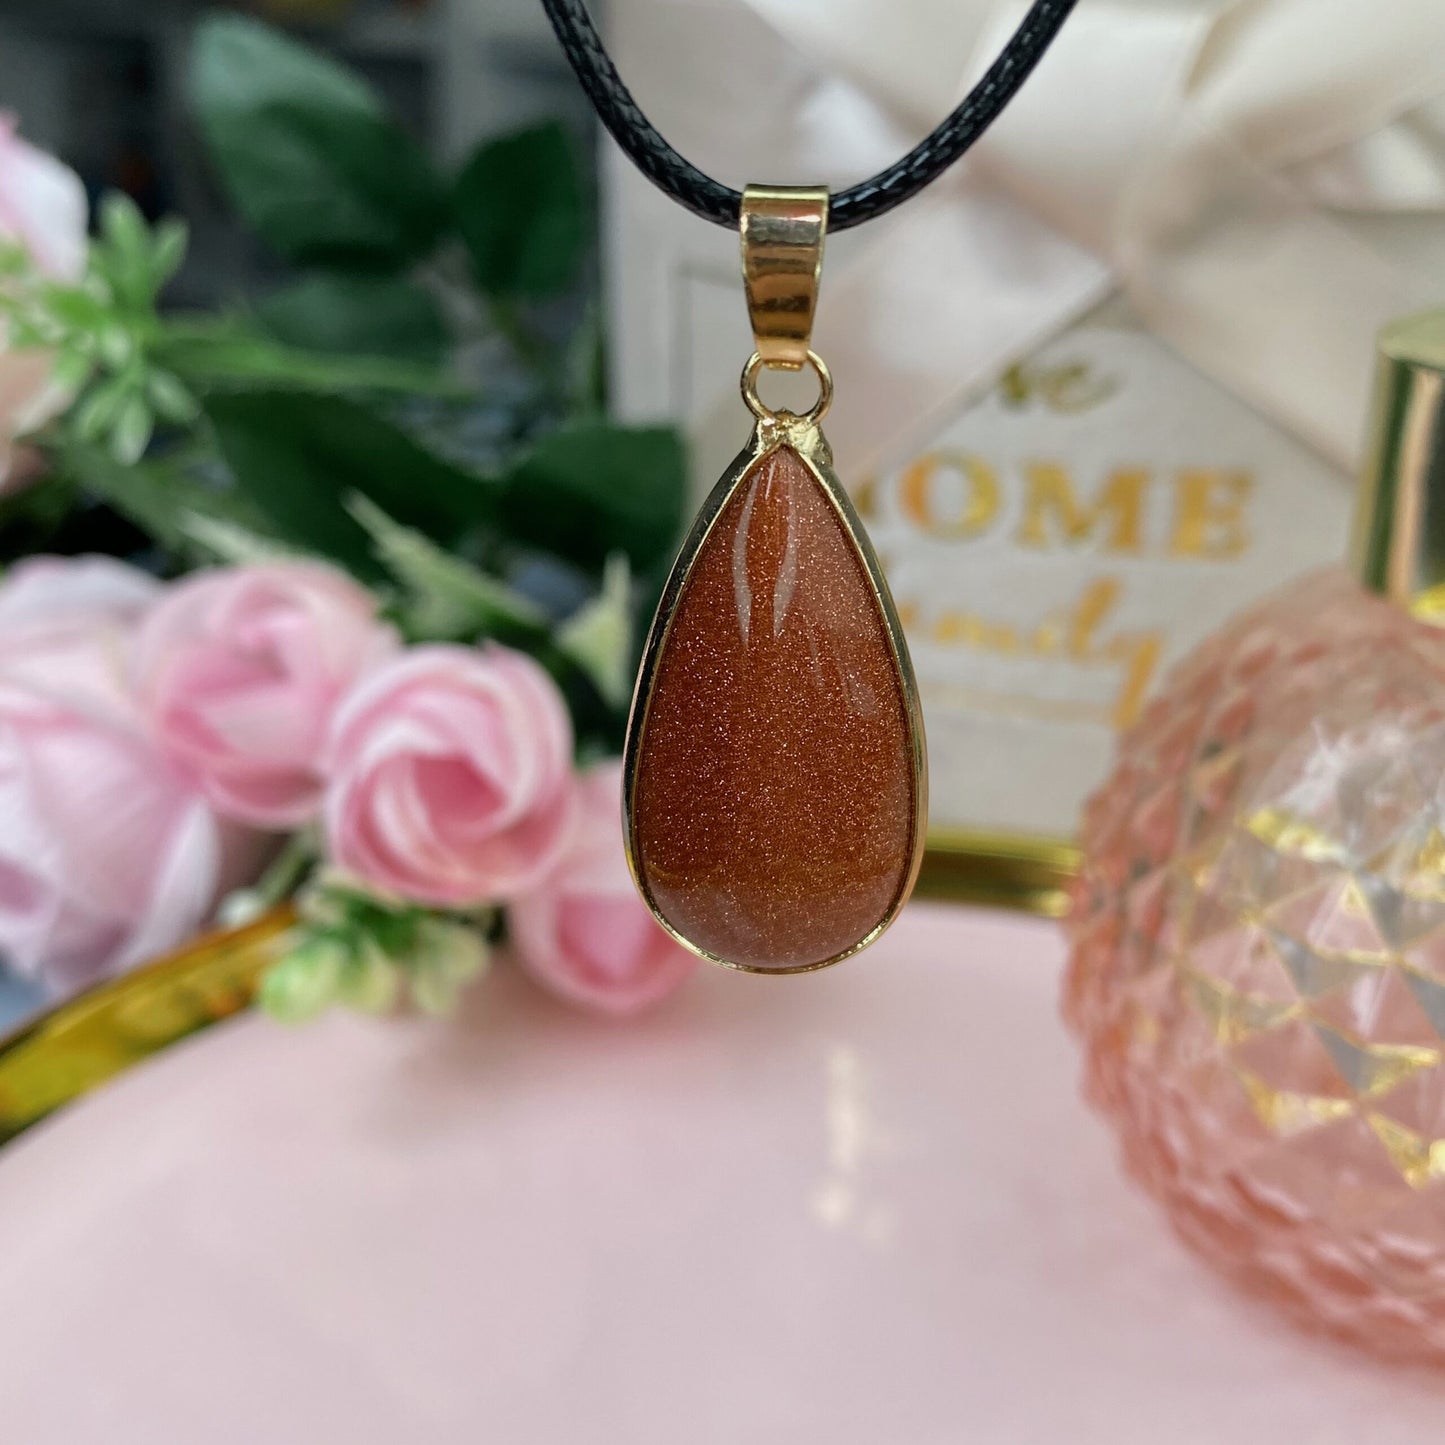 Goldstone / Aventurine Glass (Goldstone is an artificially created crystal)